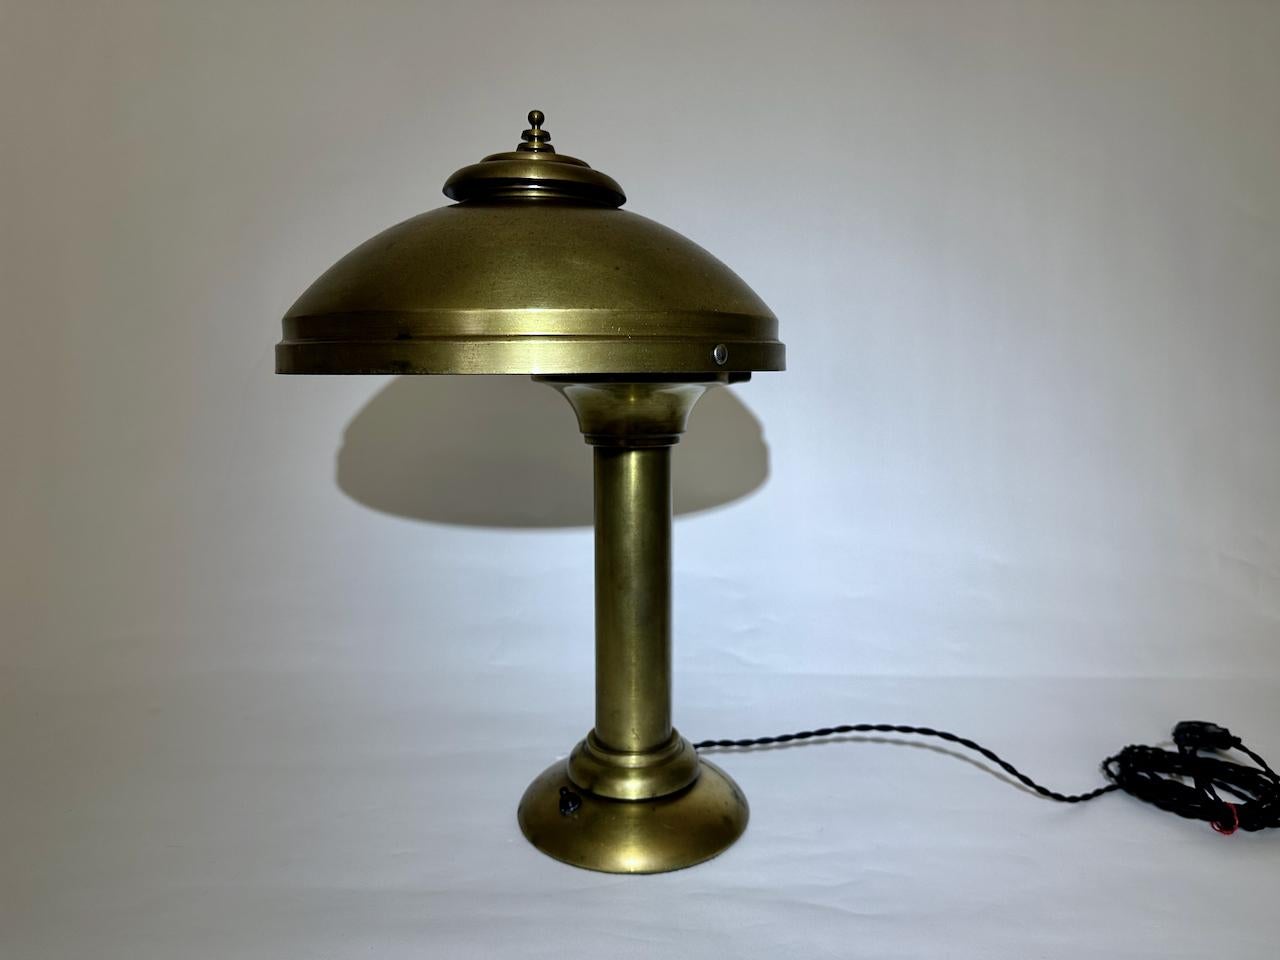 Fairies Mfg. Co. Cantilever All Brass Shaded Desk Lamp, 1920s For Sale 2